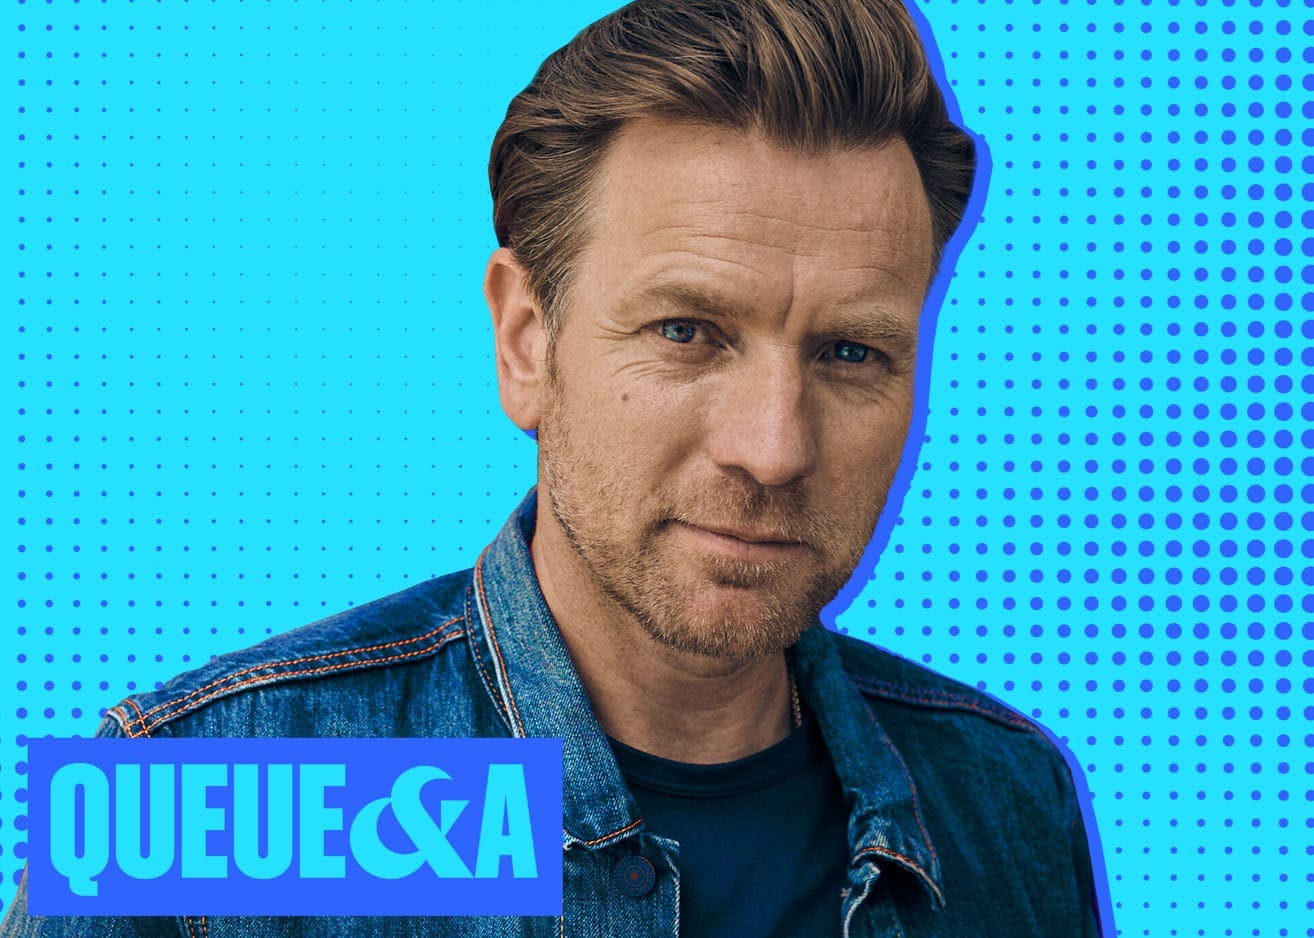 A portrait of Ewan McGregor against a turquoise blue and dark blue background. He wears a jean jacket and navy shirt. Below his face reads: Queue & A in a blue box.